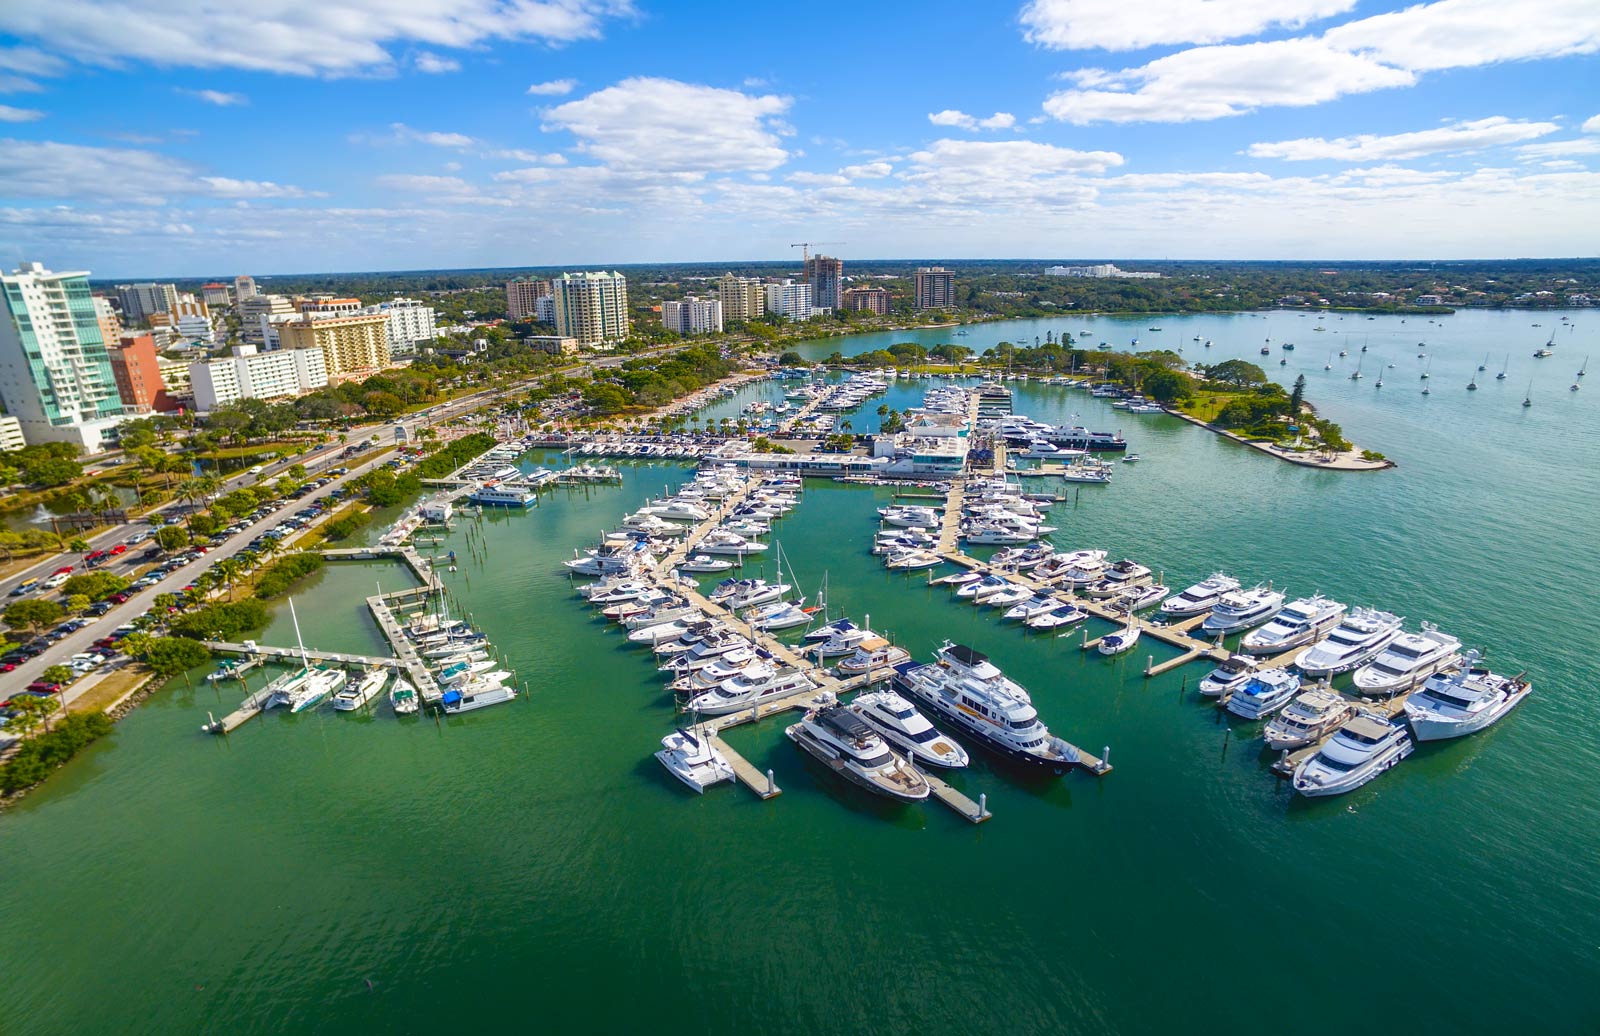 Where to stay in Sarasota Florida